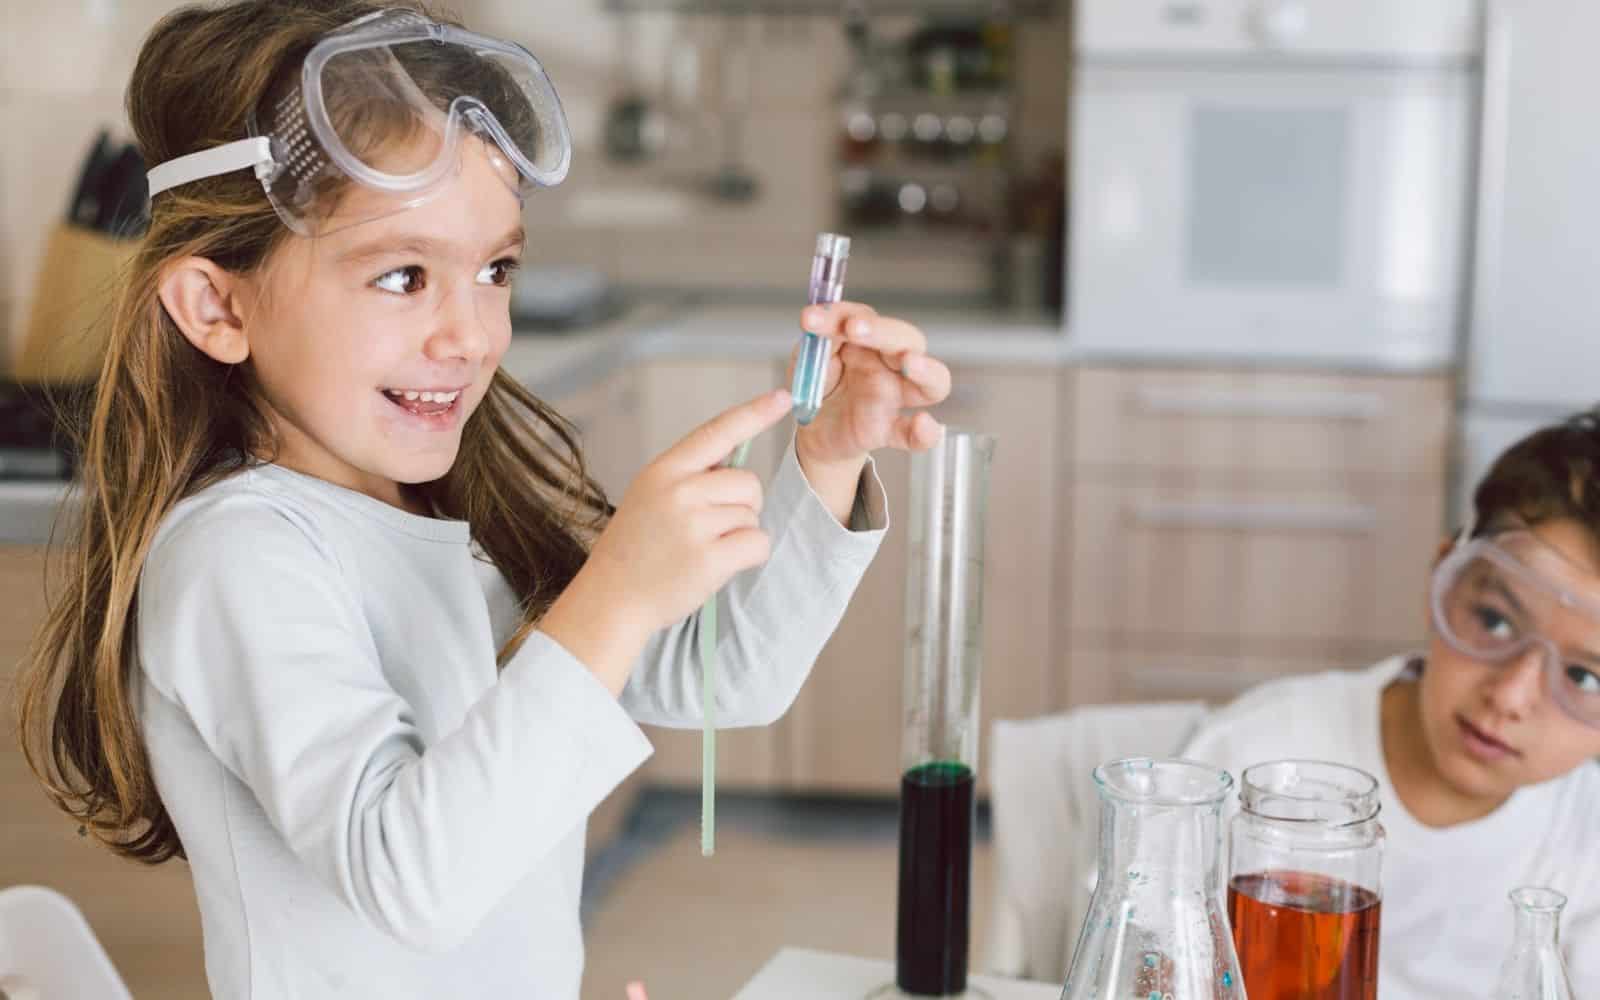 science activities for preschoolers - ideas and experiments